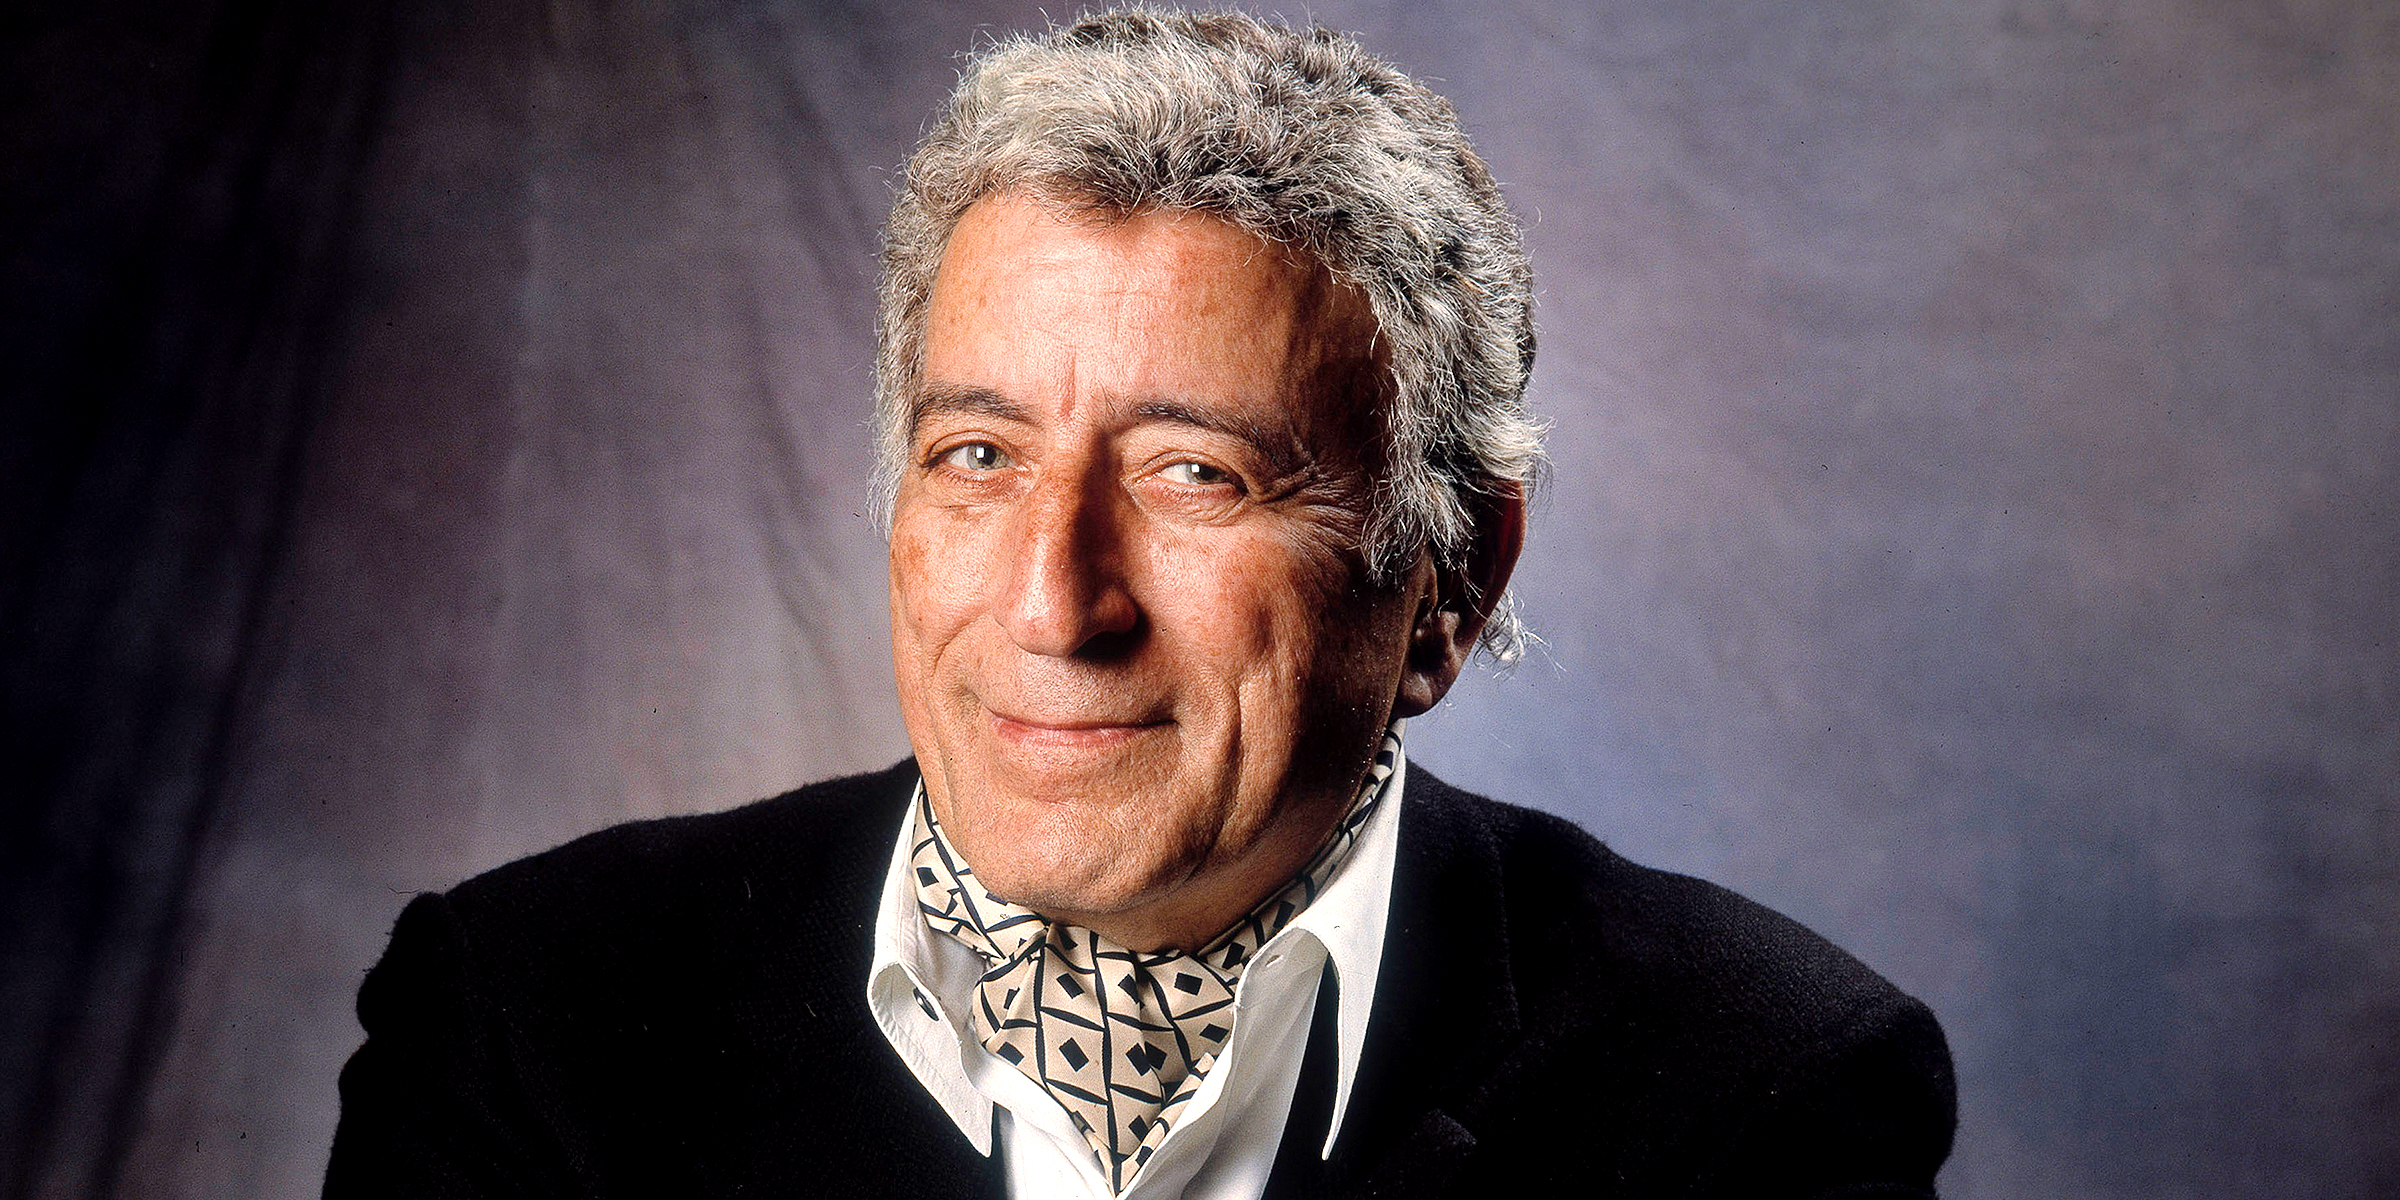 Tony Bennett | Source: Getty Images